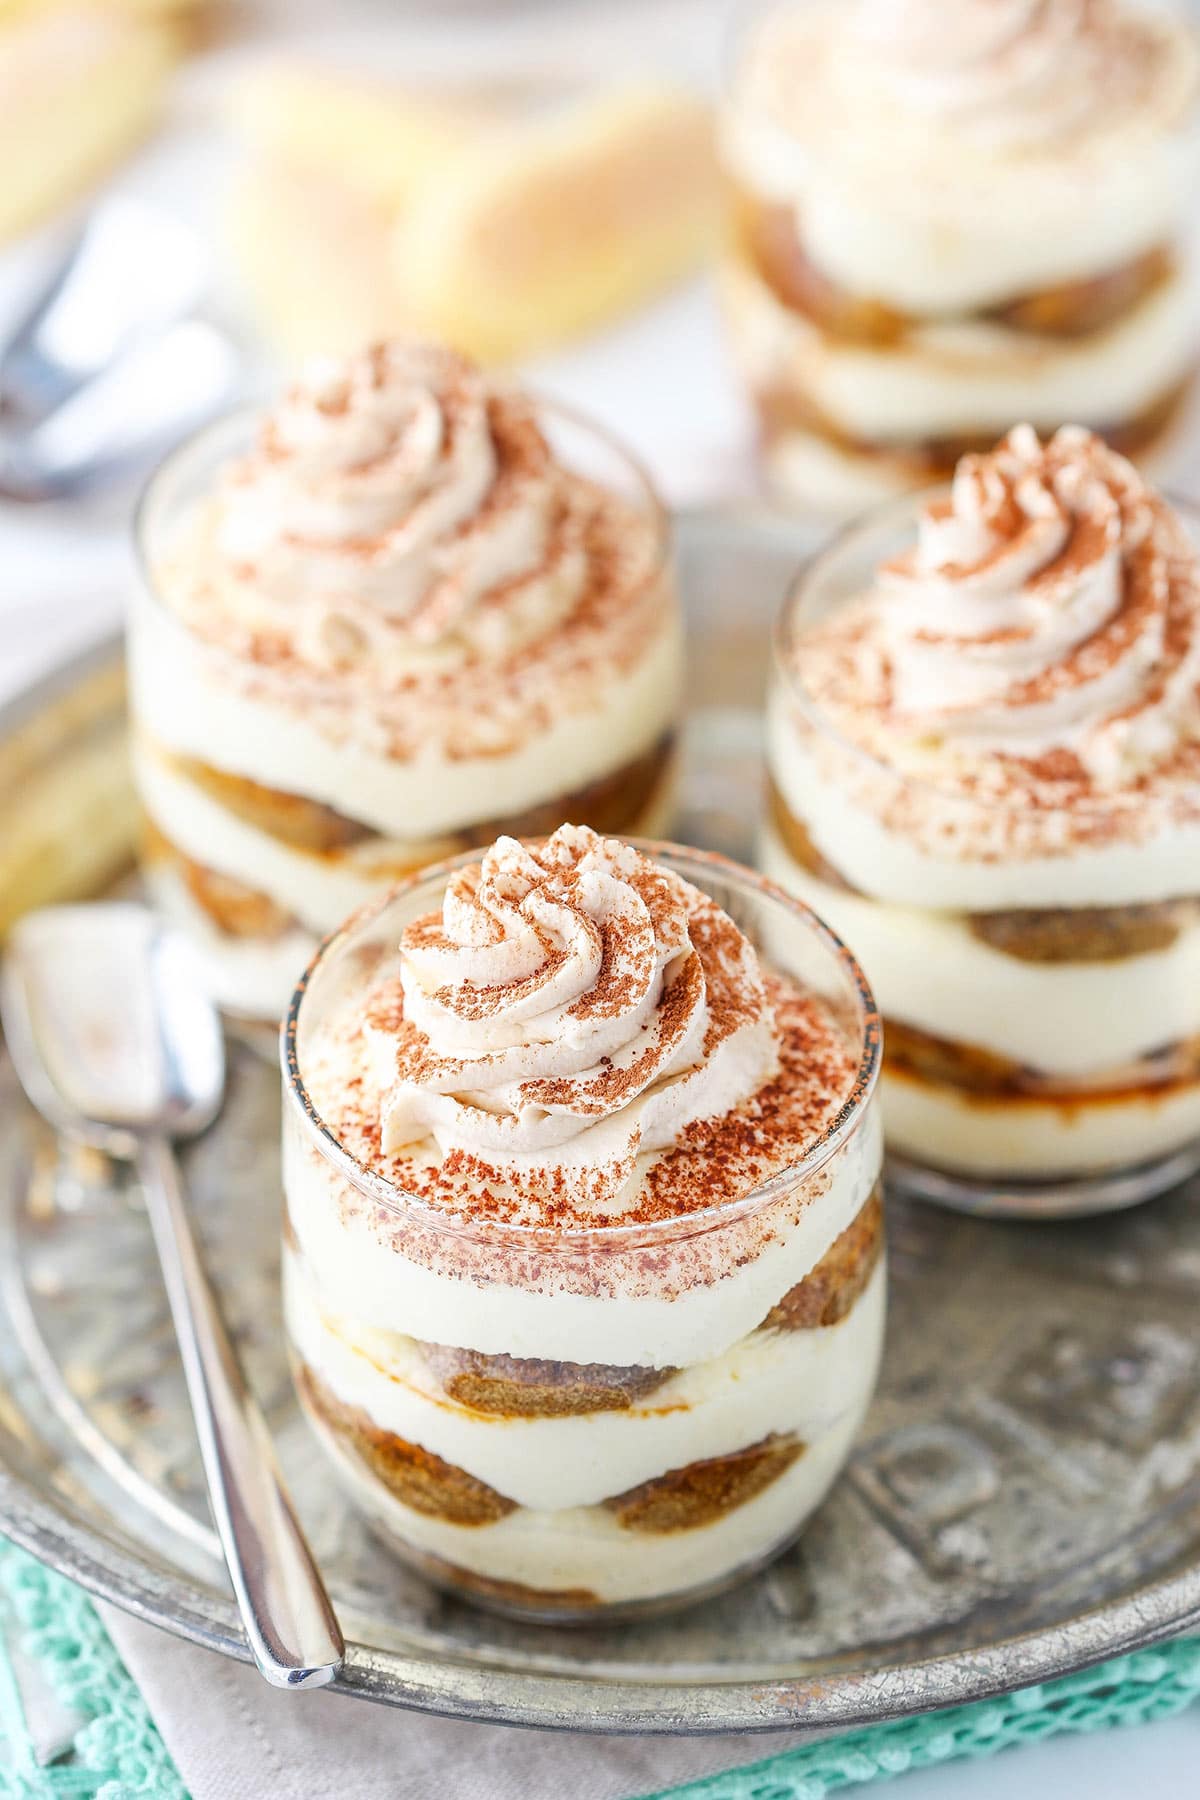 Three no-bake trifles with whipped cream and a dusting of cocoa powder on top of each one